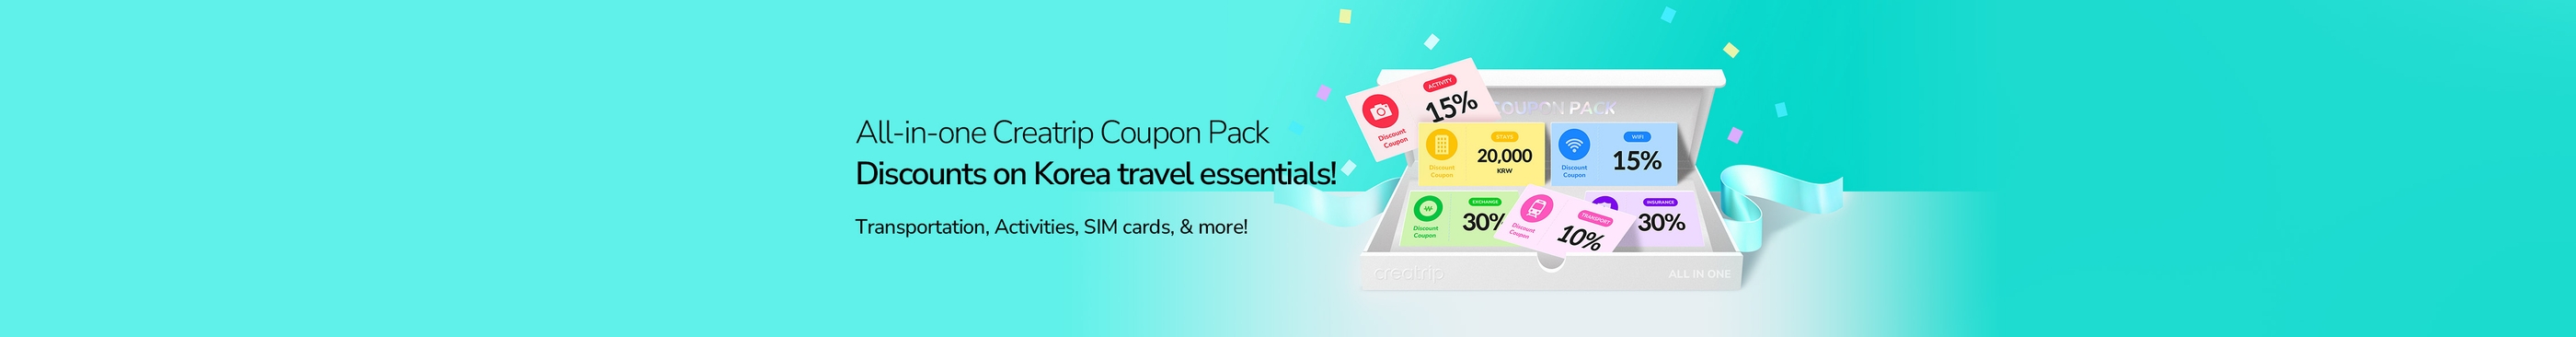 All-in-one Creatrip Coupon Pack